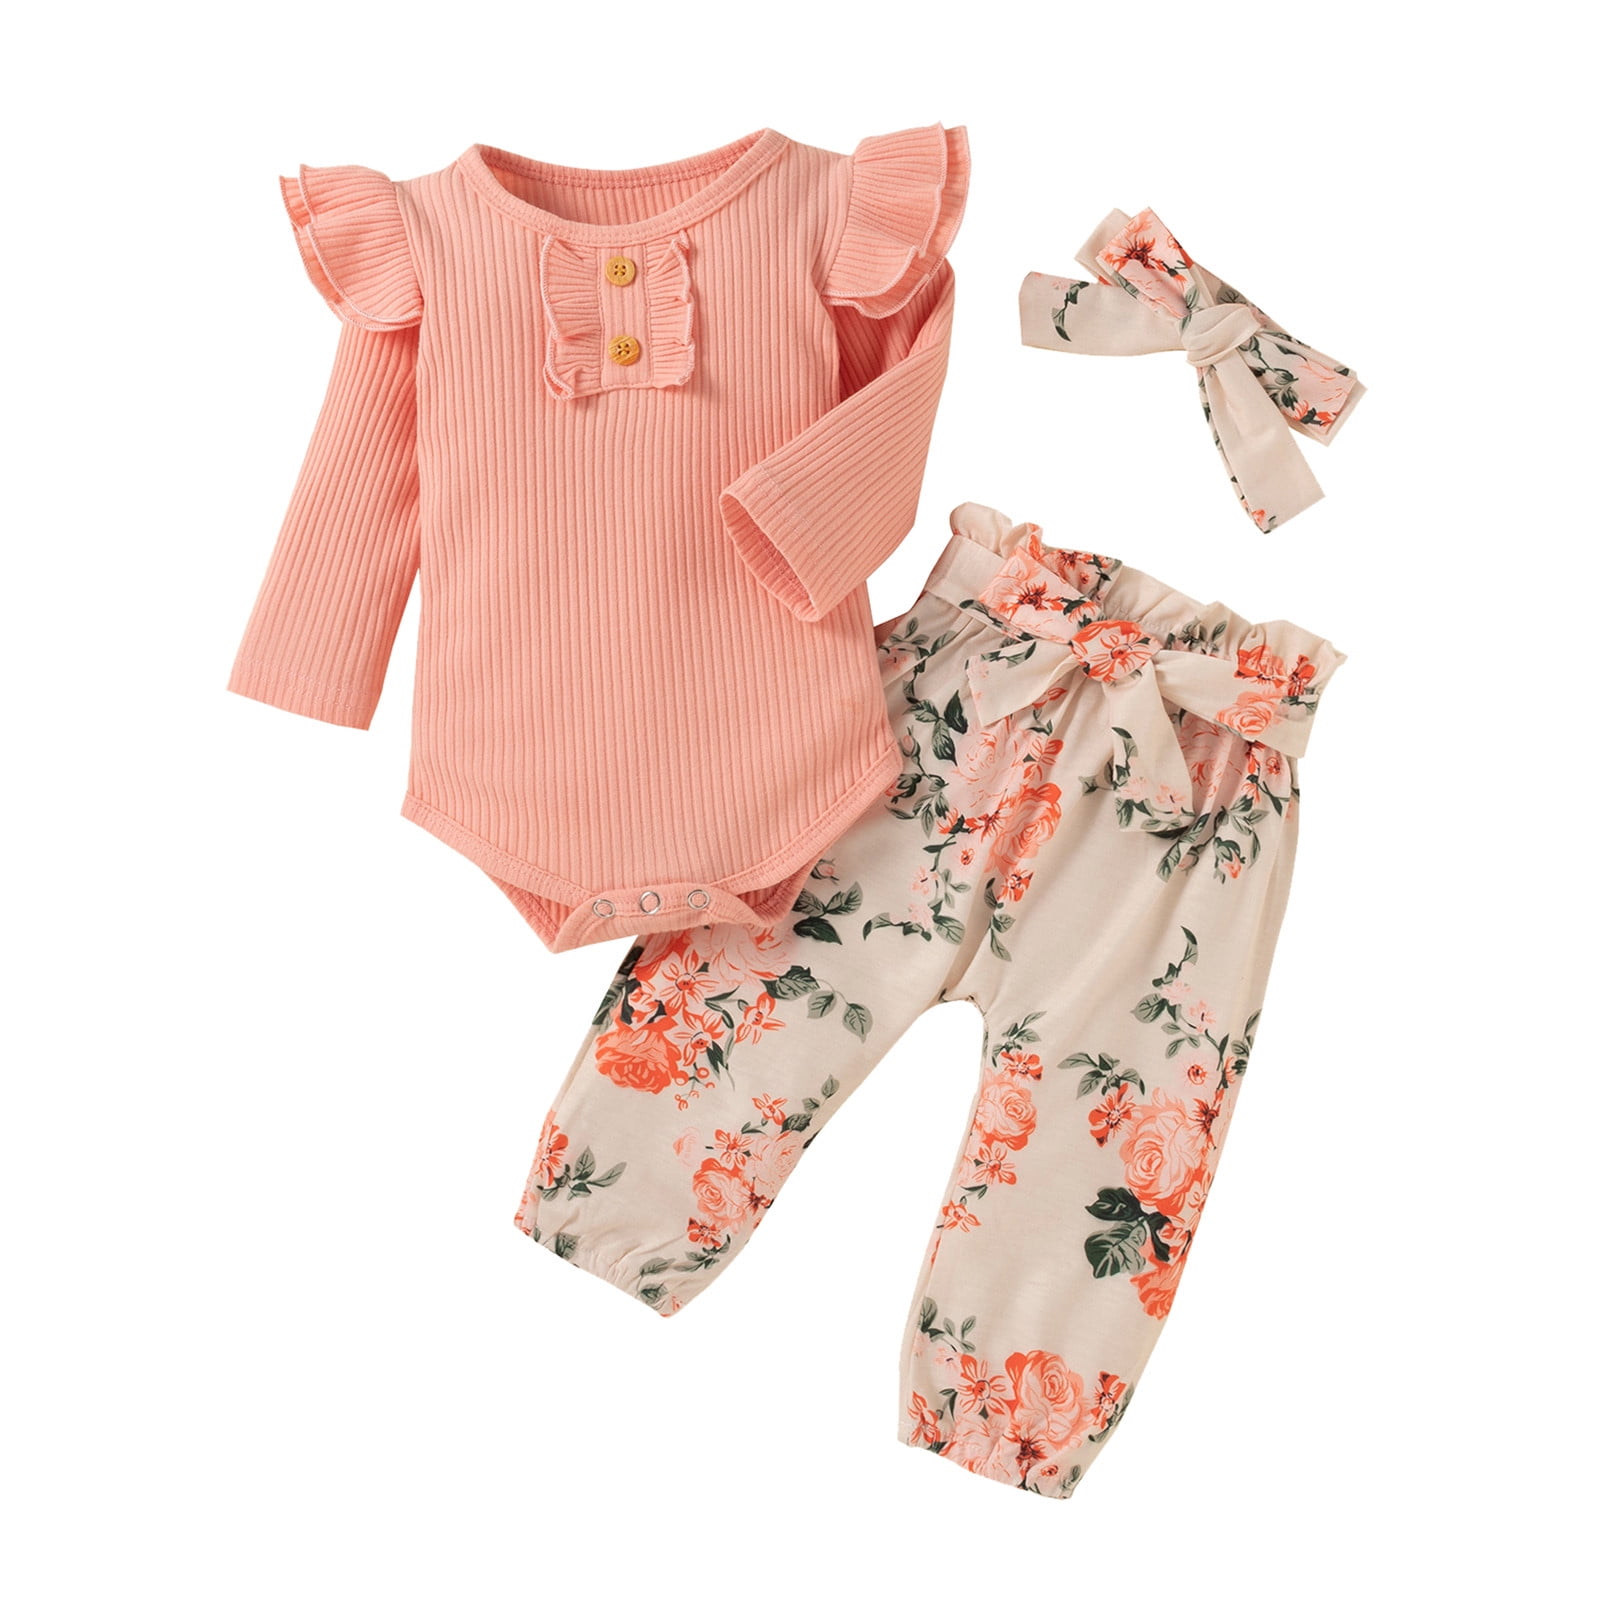 Baby Girls Ribbed Romper Tops+ Floral Pants Headband Outfits Set Little ...